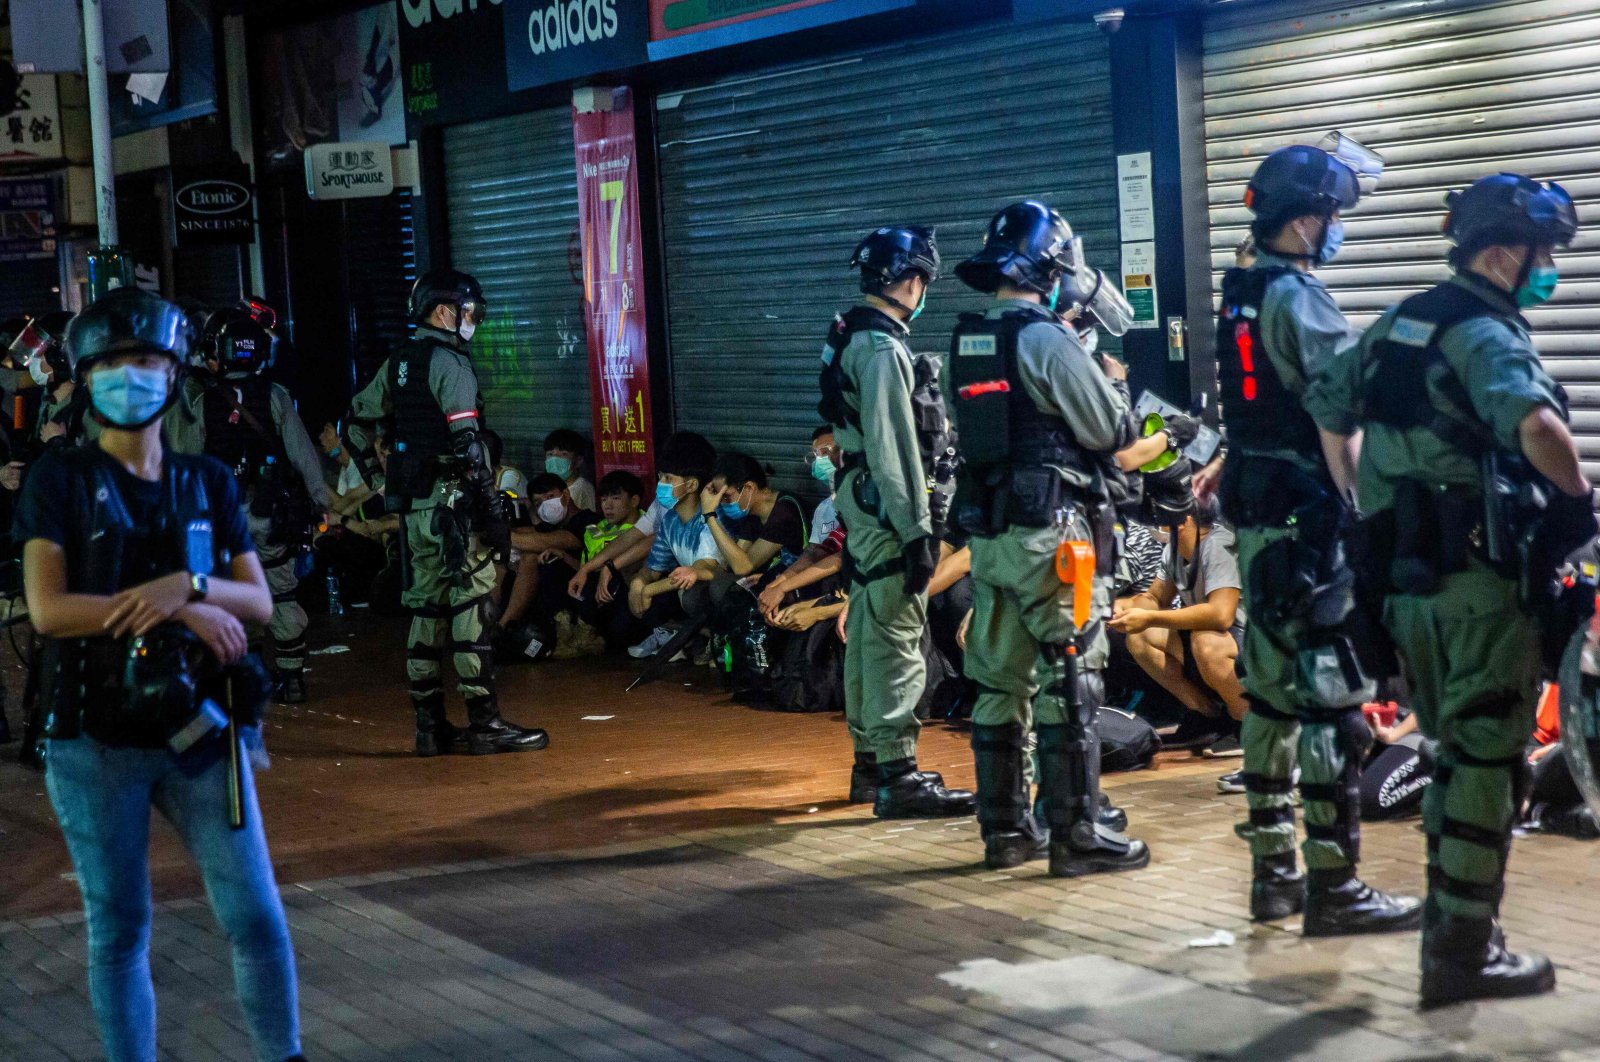 Police detain a group of people during a protest, Hong Kong, May 10, 2020. (AFP Photo)